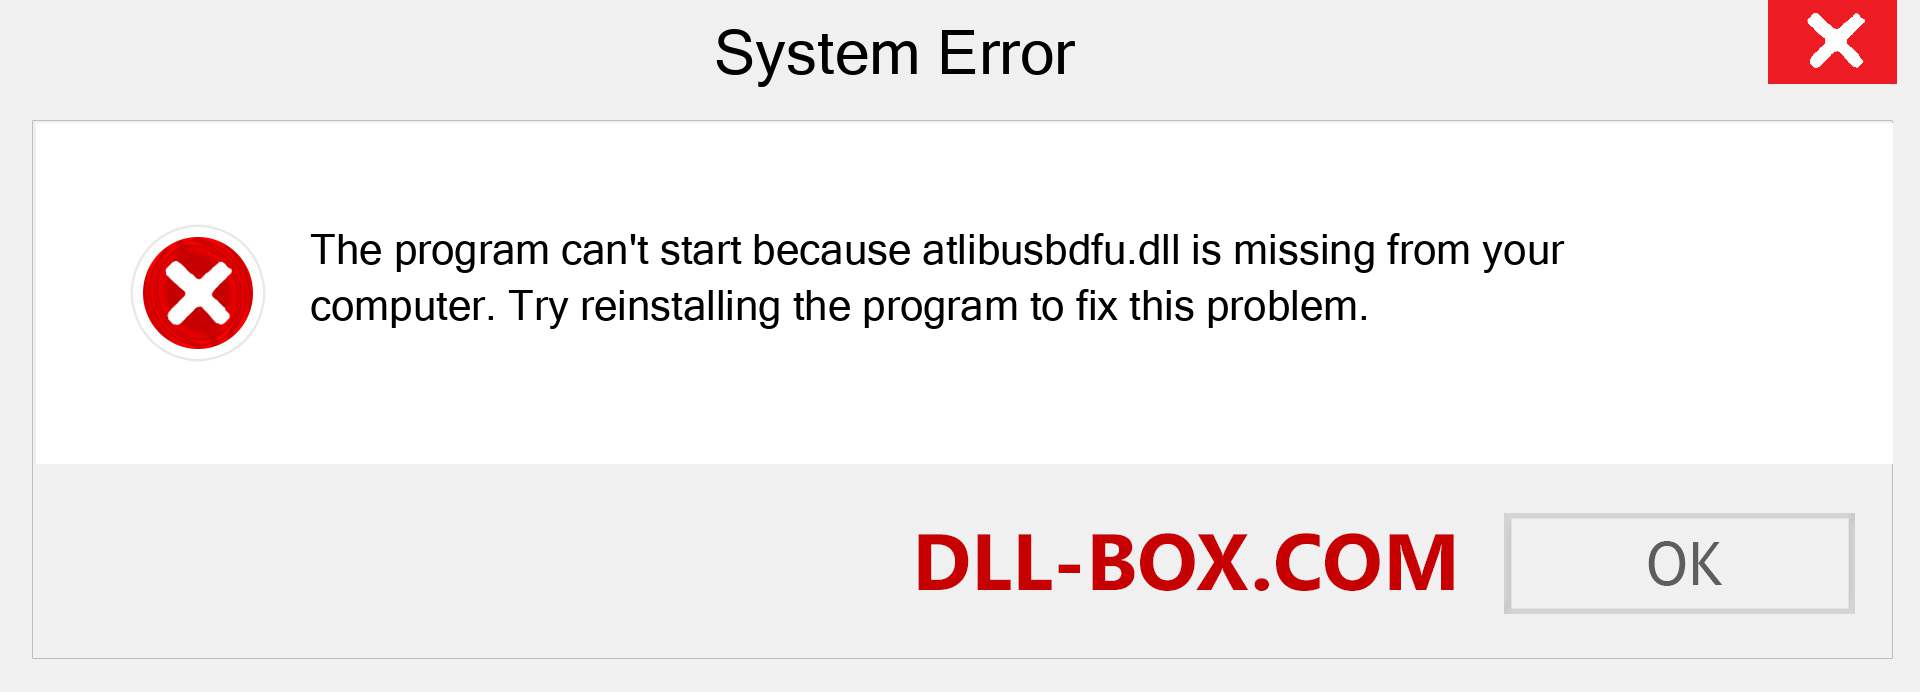  atlibusbdfu.dll file is missing?. Download for Windows 7, 8, 10 - Fix  atlibusbdfu dll Missing Error on Windows, photos, images